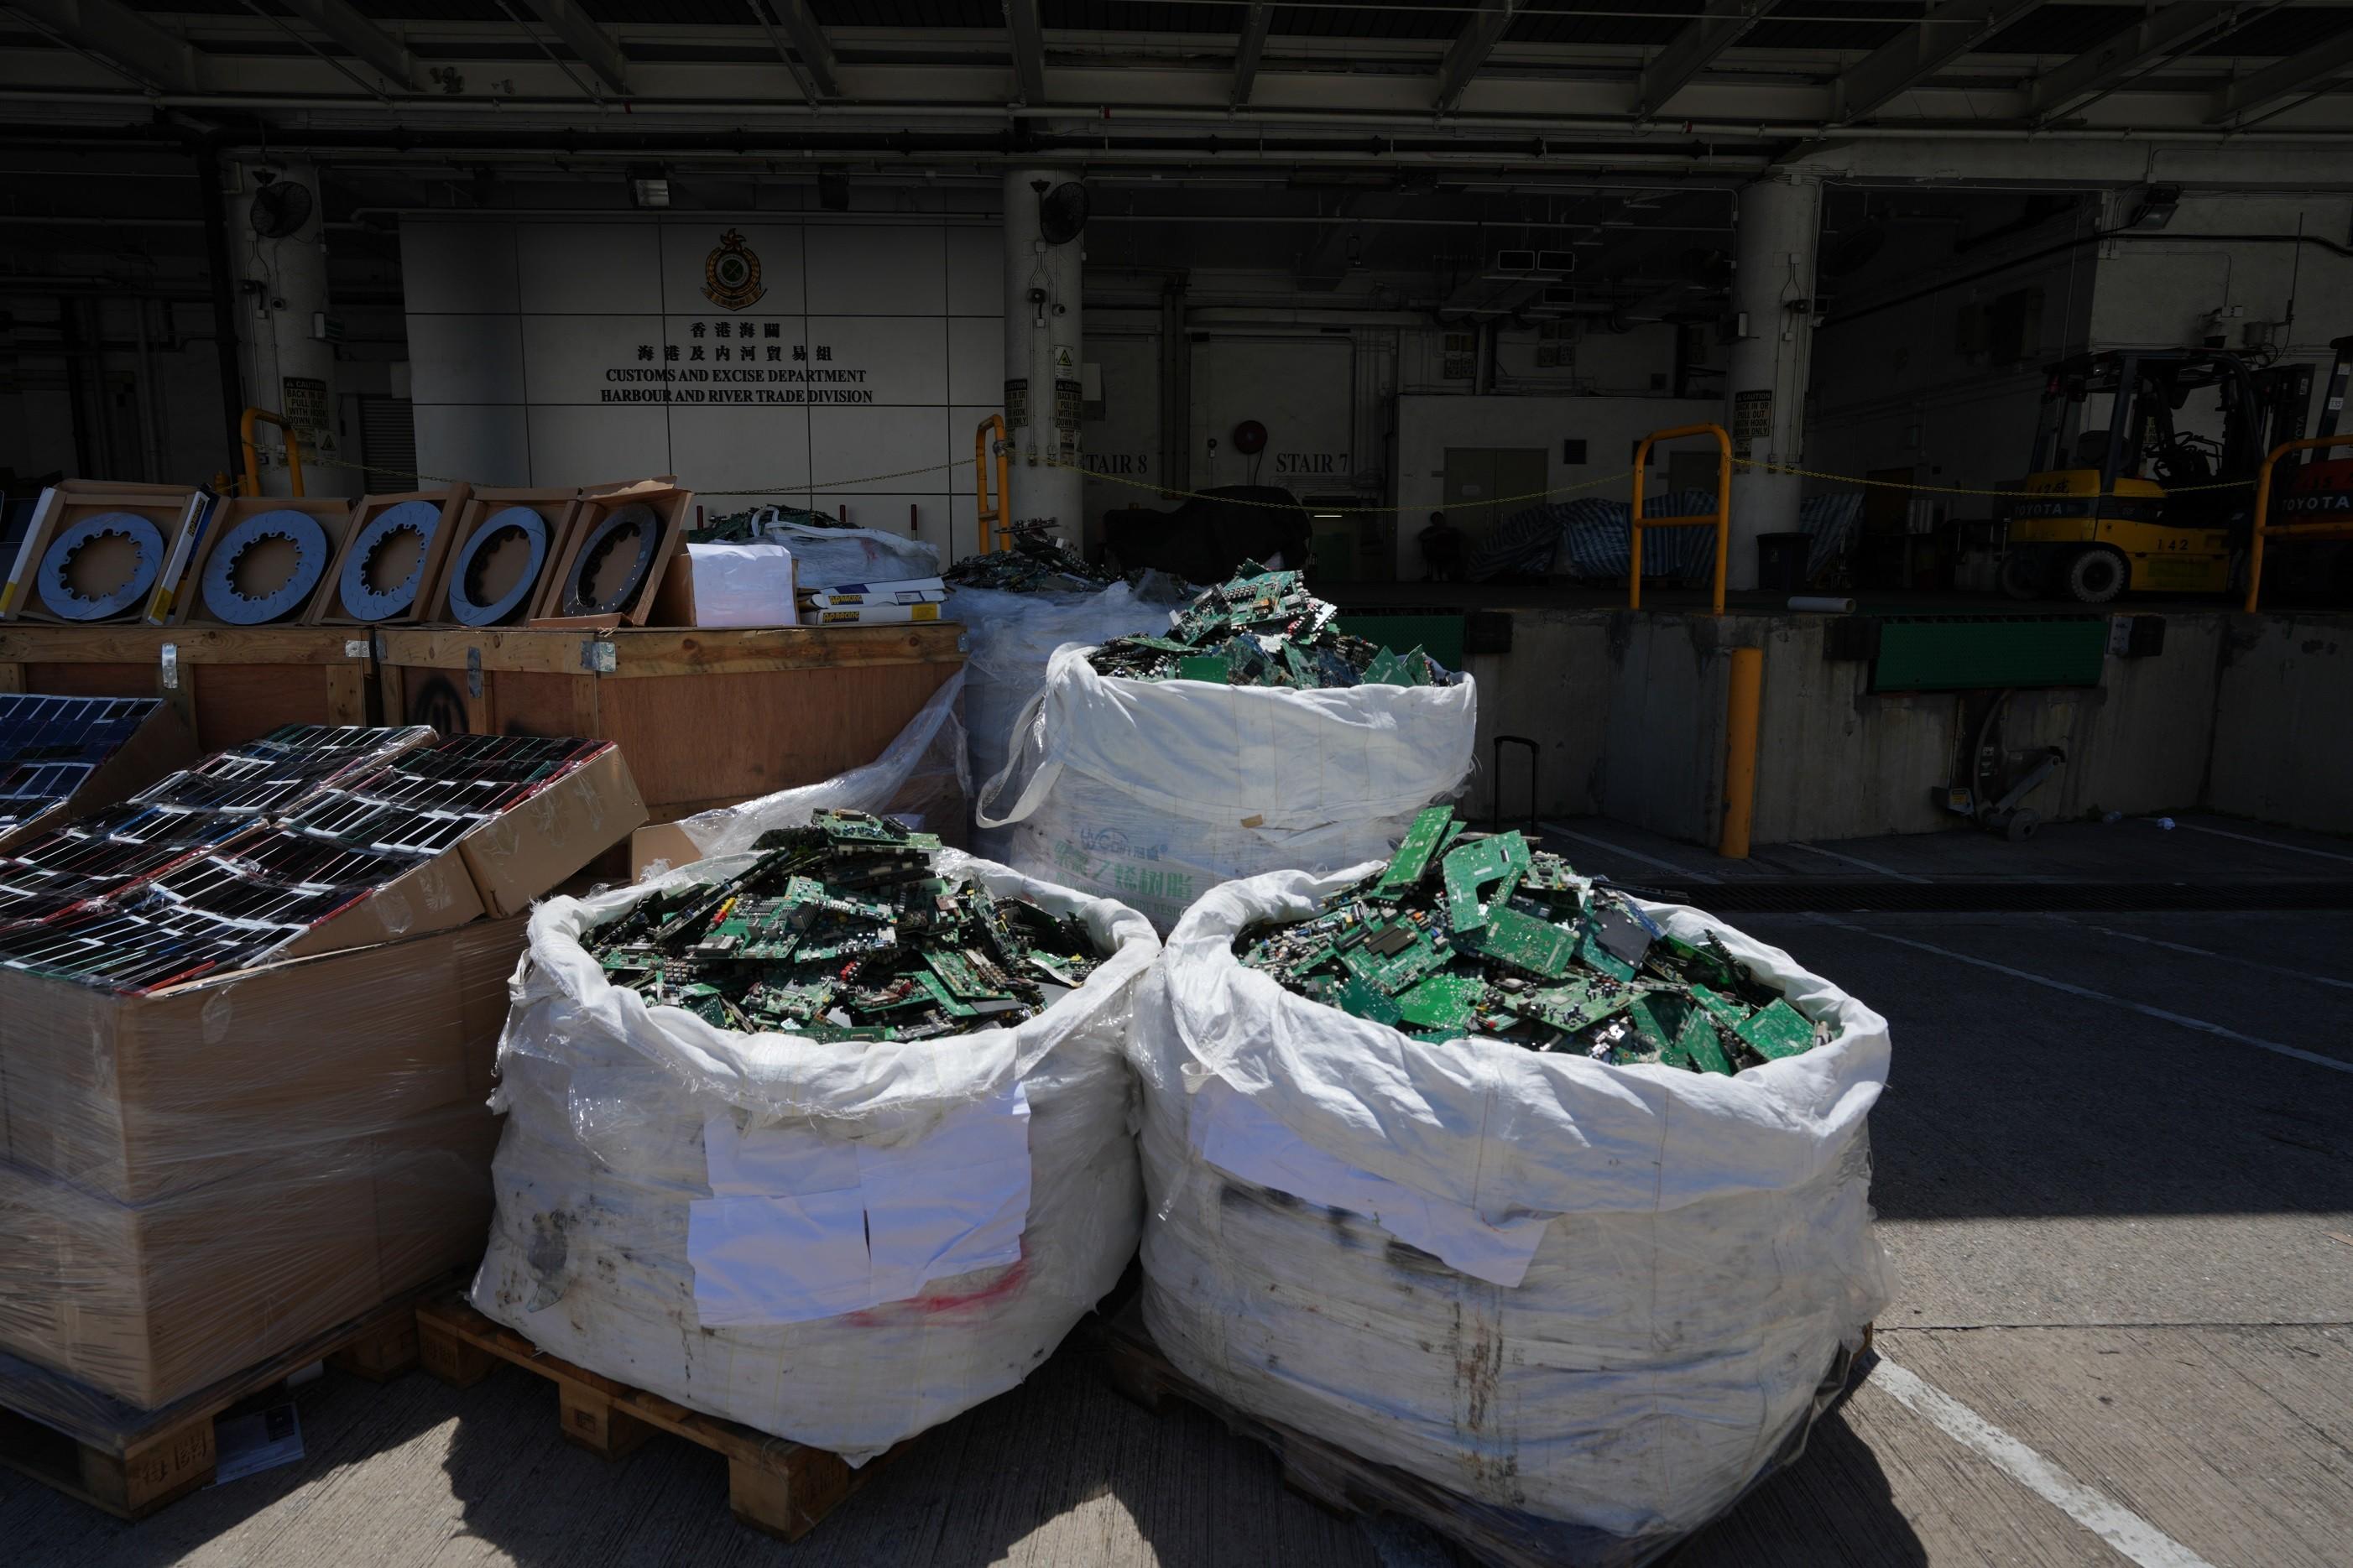 Hong Kong Customs mounted a special operation codenamed "Big Wave" in June and detected three suspected smuggling cases involving ocean-going vessels. A large batch of suspected smuggled goods with a total estimated market value of about $100 million was seized. Photo shows some of suspected smuggled electric boards seized.